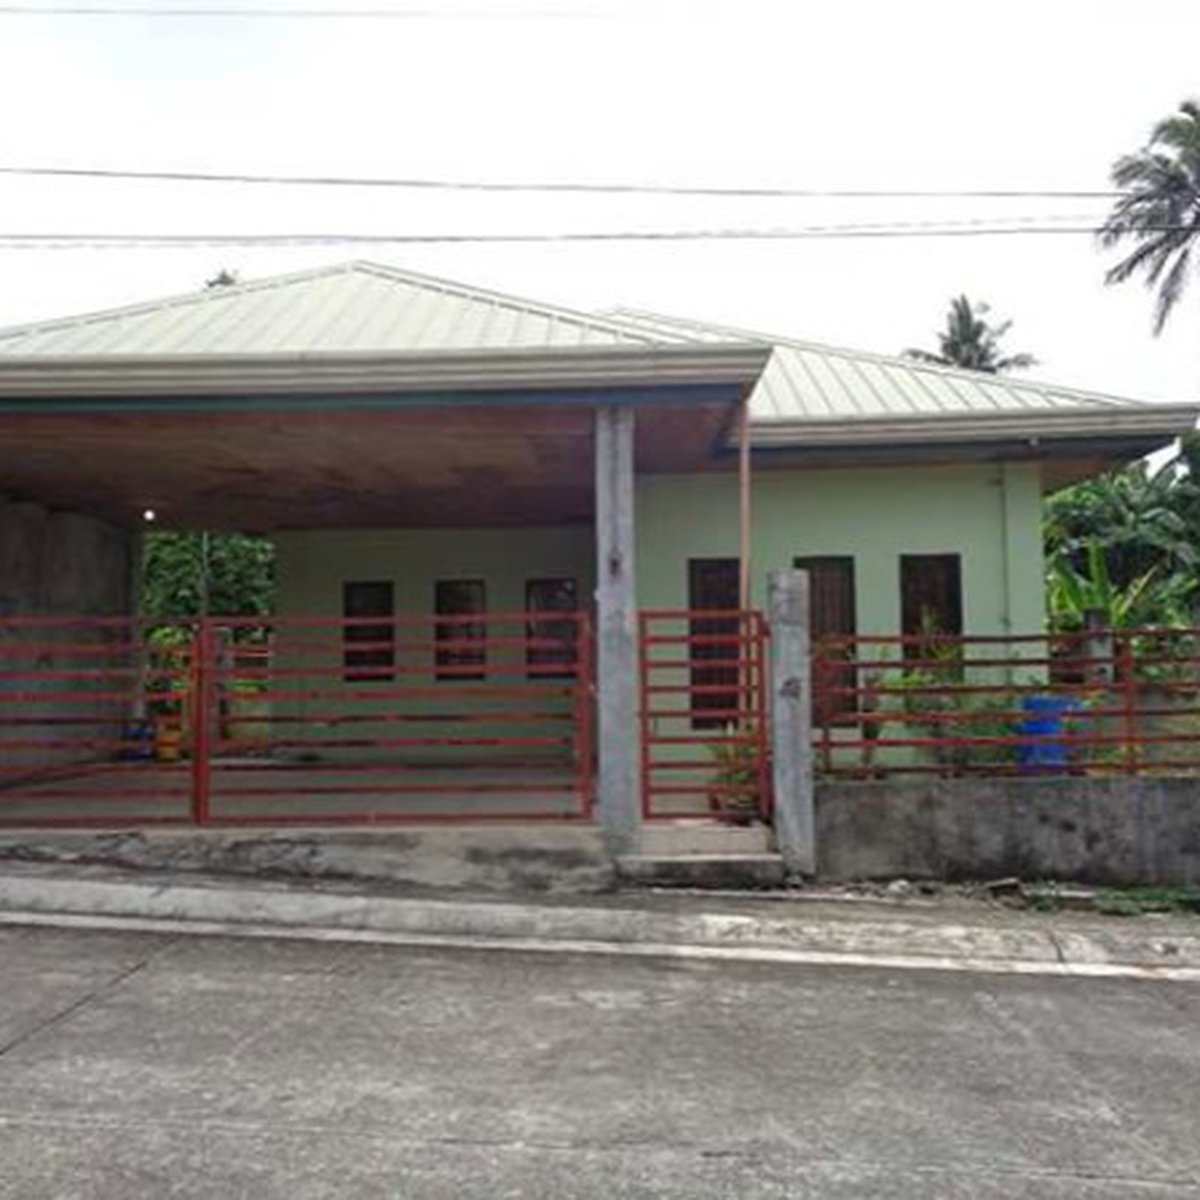 PREOWNED PROPERTY FOR SALE BUENA VIDA HEIGHTS SUBD ORMOC CITY, LEYTE